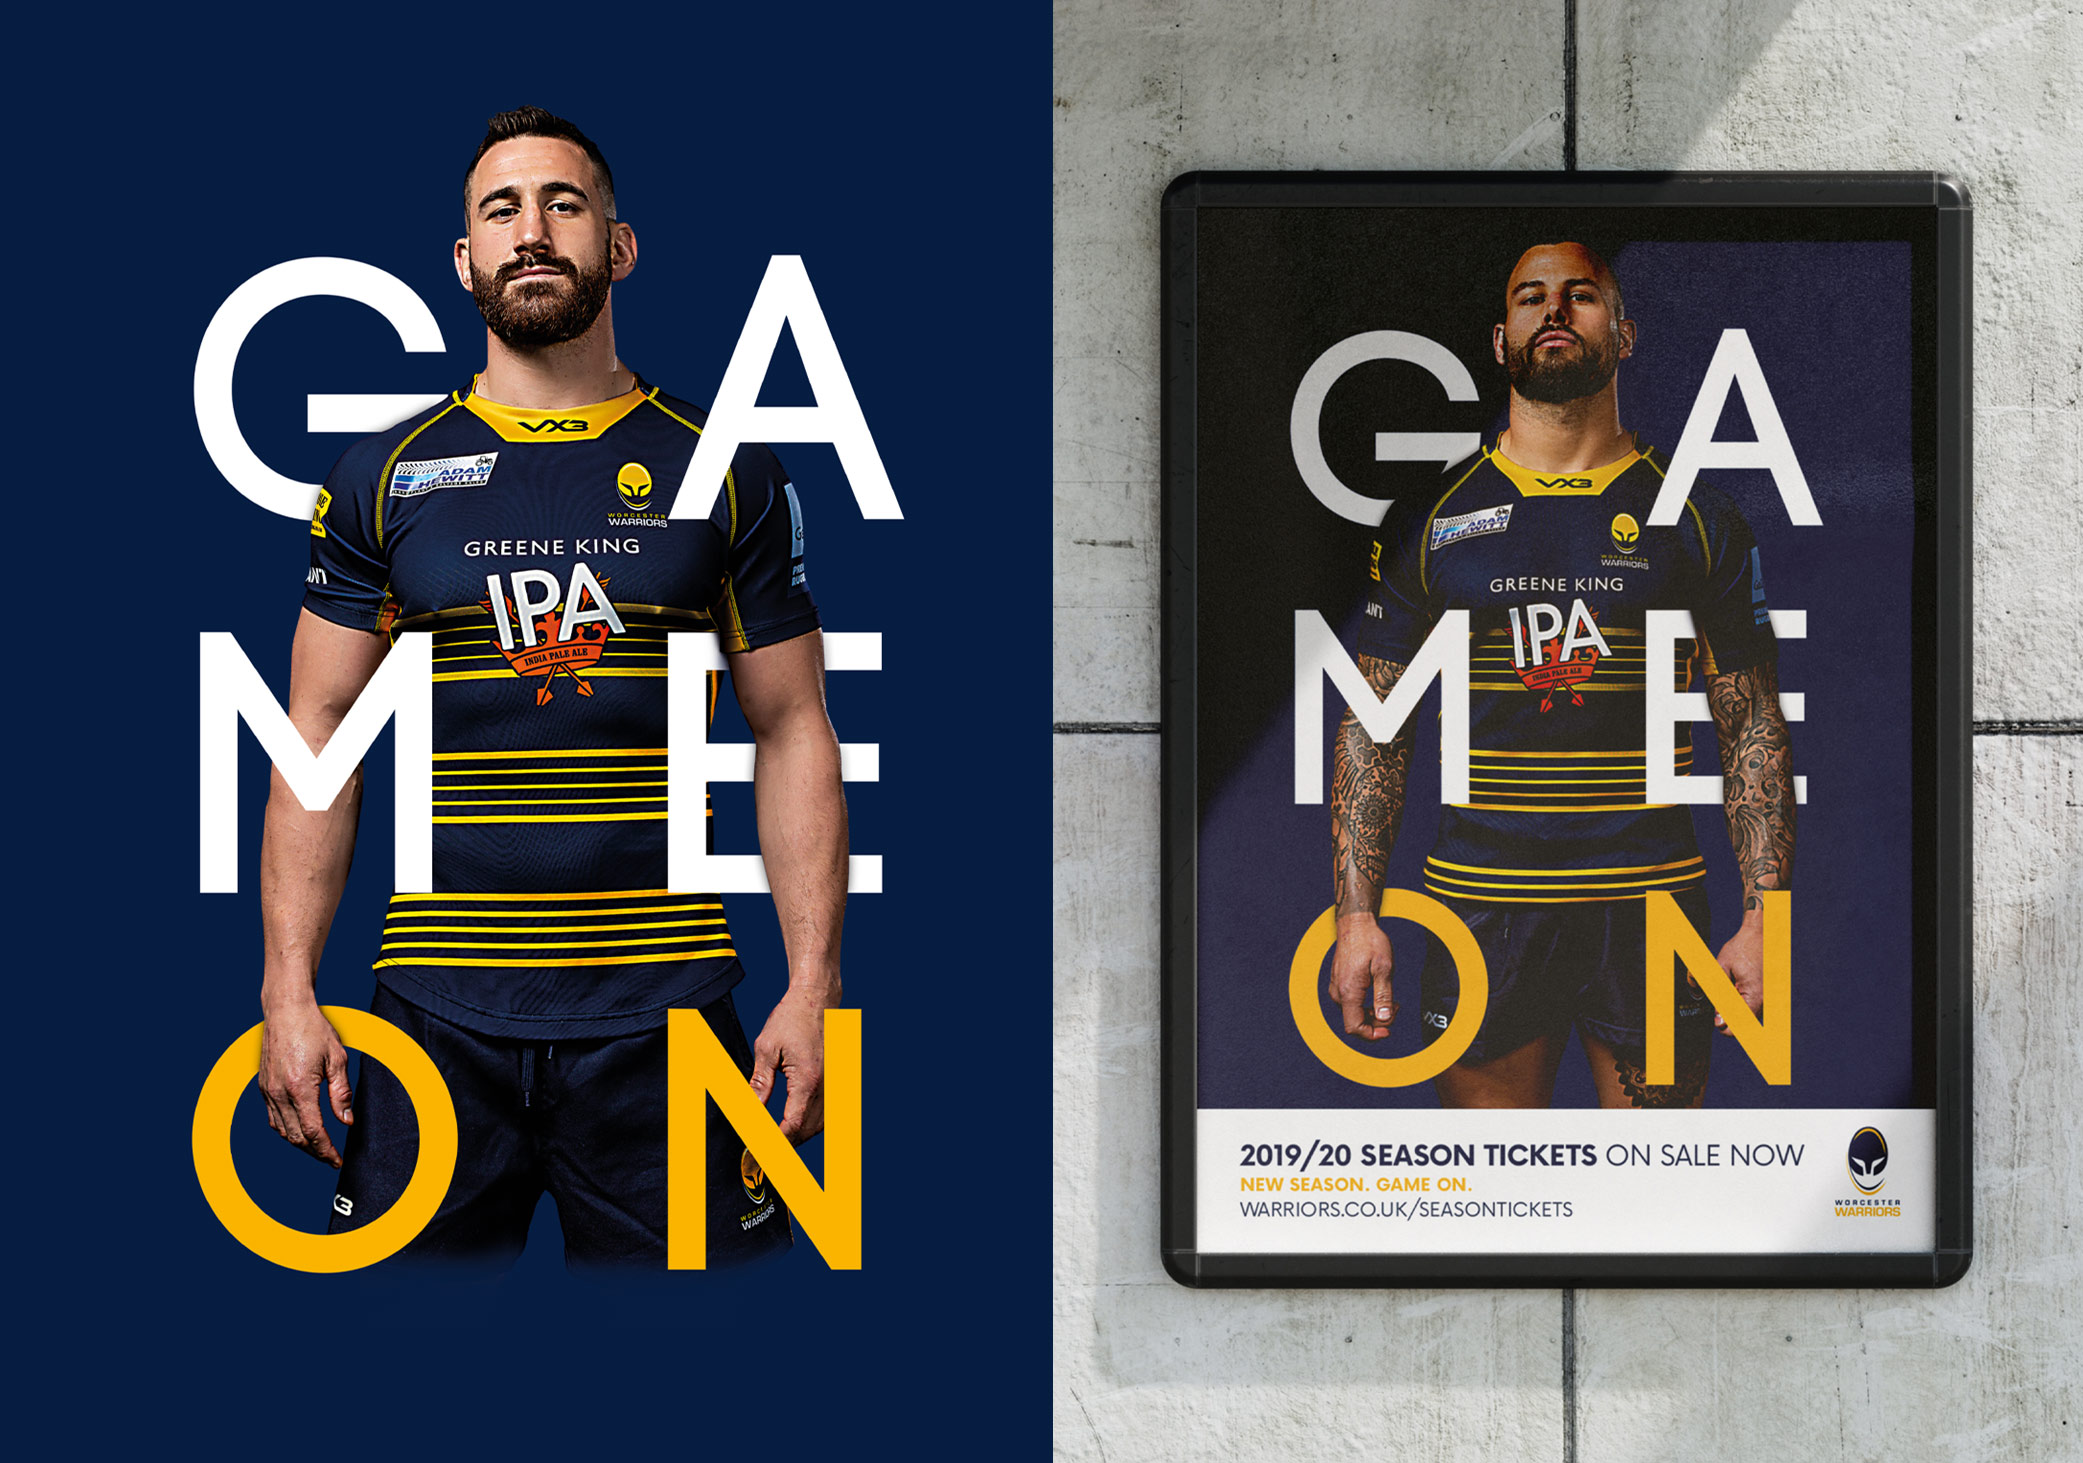 Worcester Warriors season tickets marketing campaign poster shown in situ